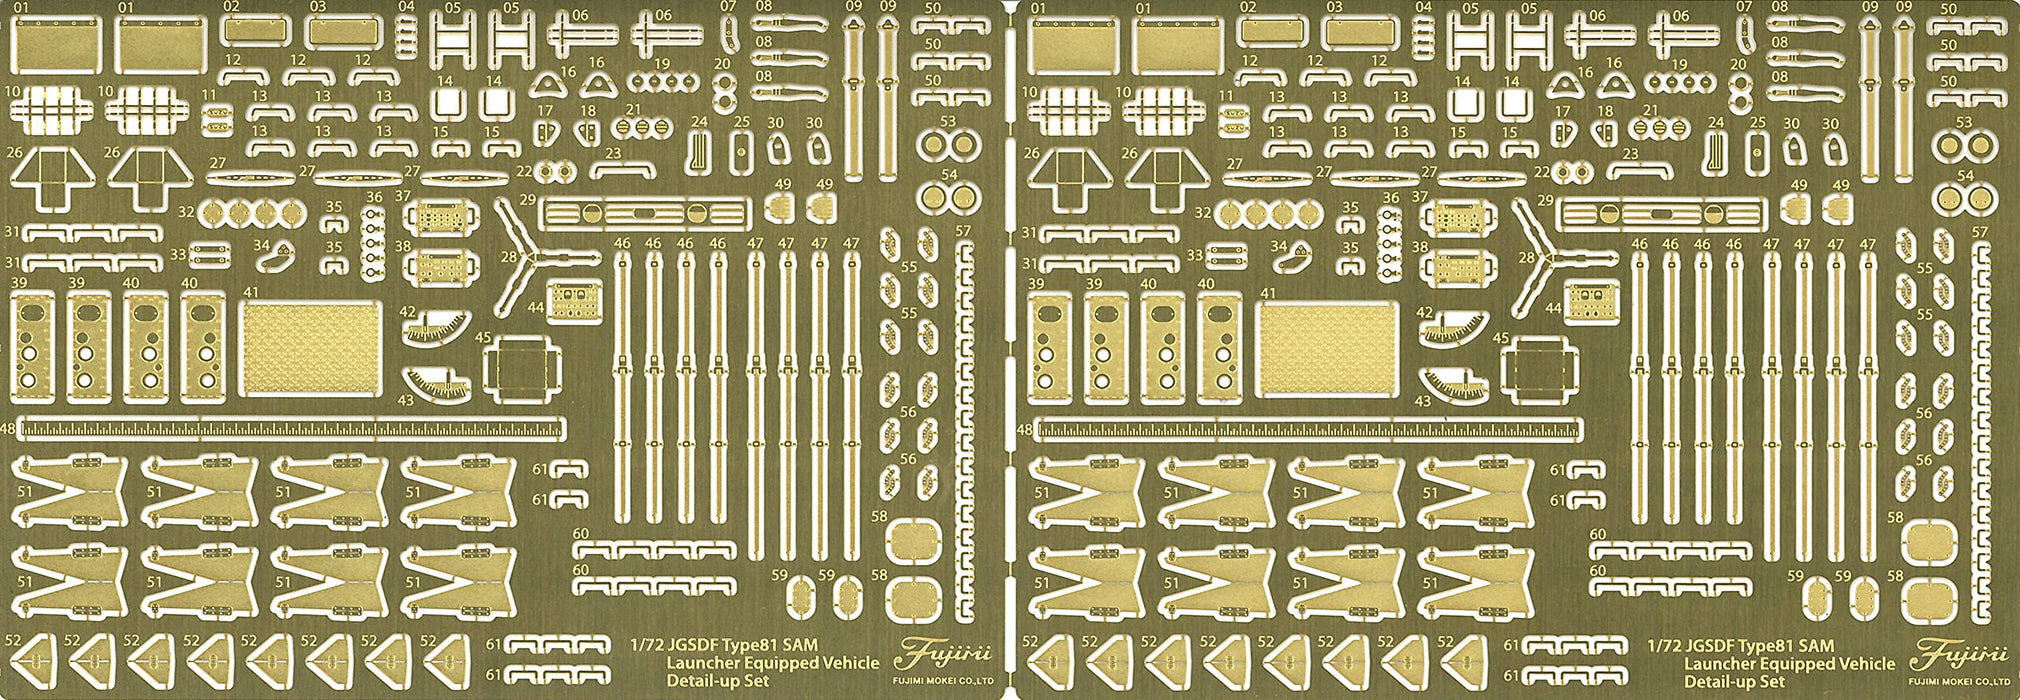 1/72 Military Series No.209 Photo-Etched Parts for JGSDF Type 81 Tank ML-209 NEW_2